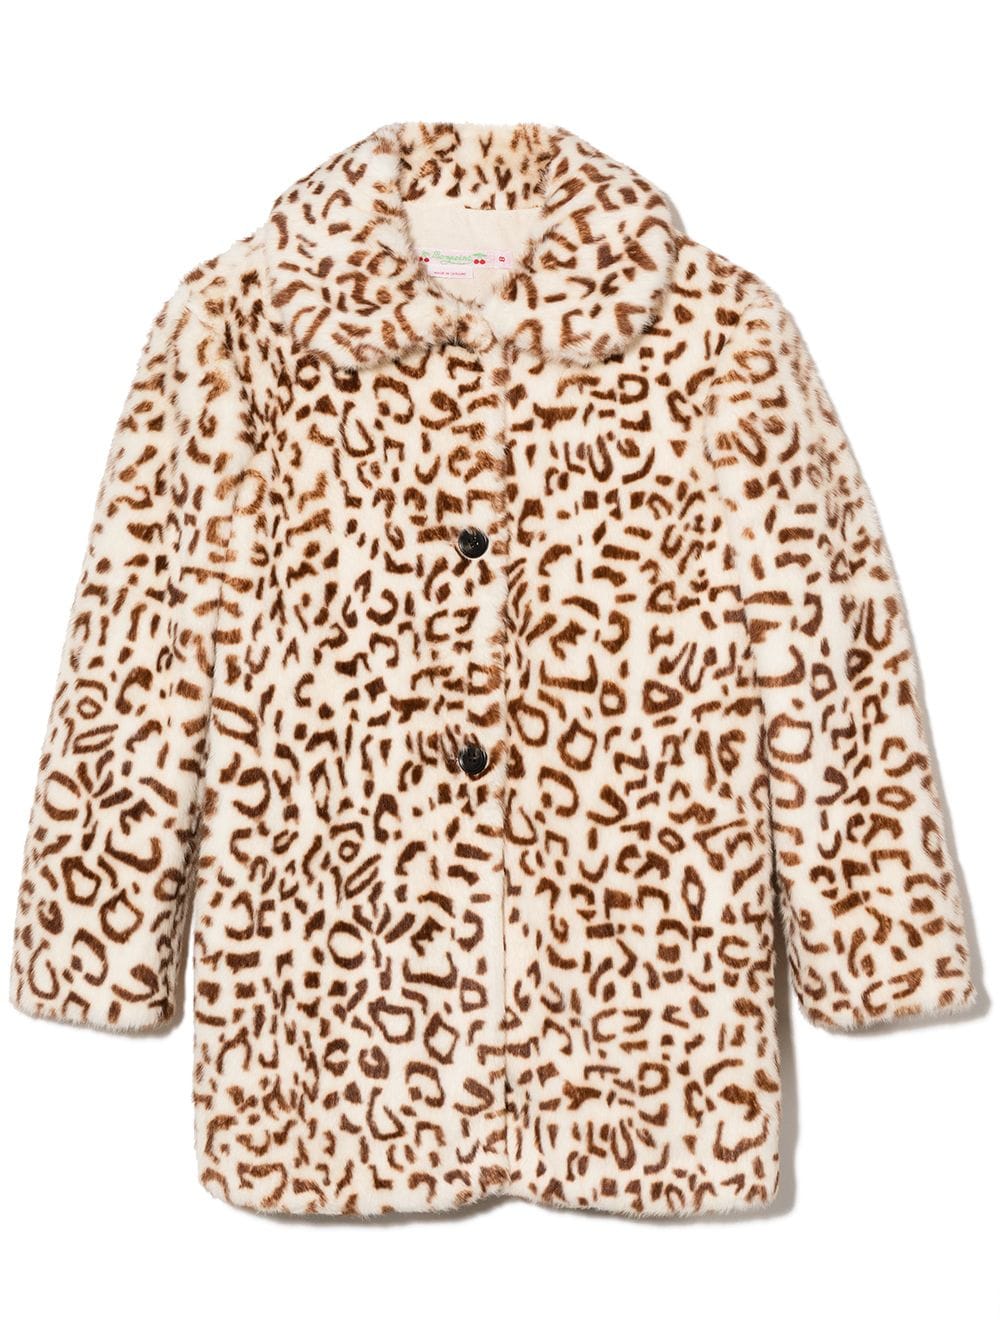 Shop Bonpoint leopard print coat with Express Delivery - FARFETCH